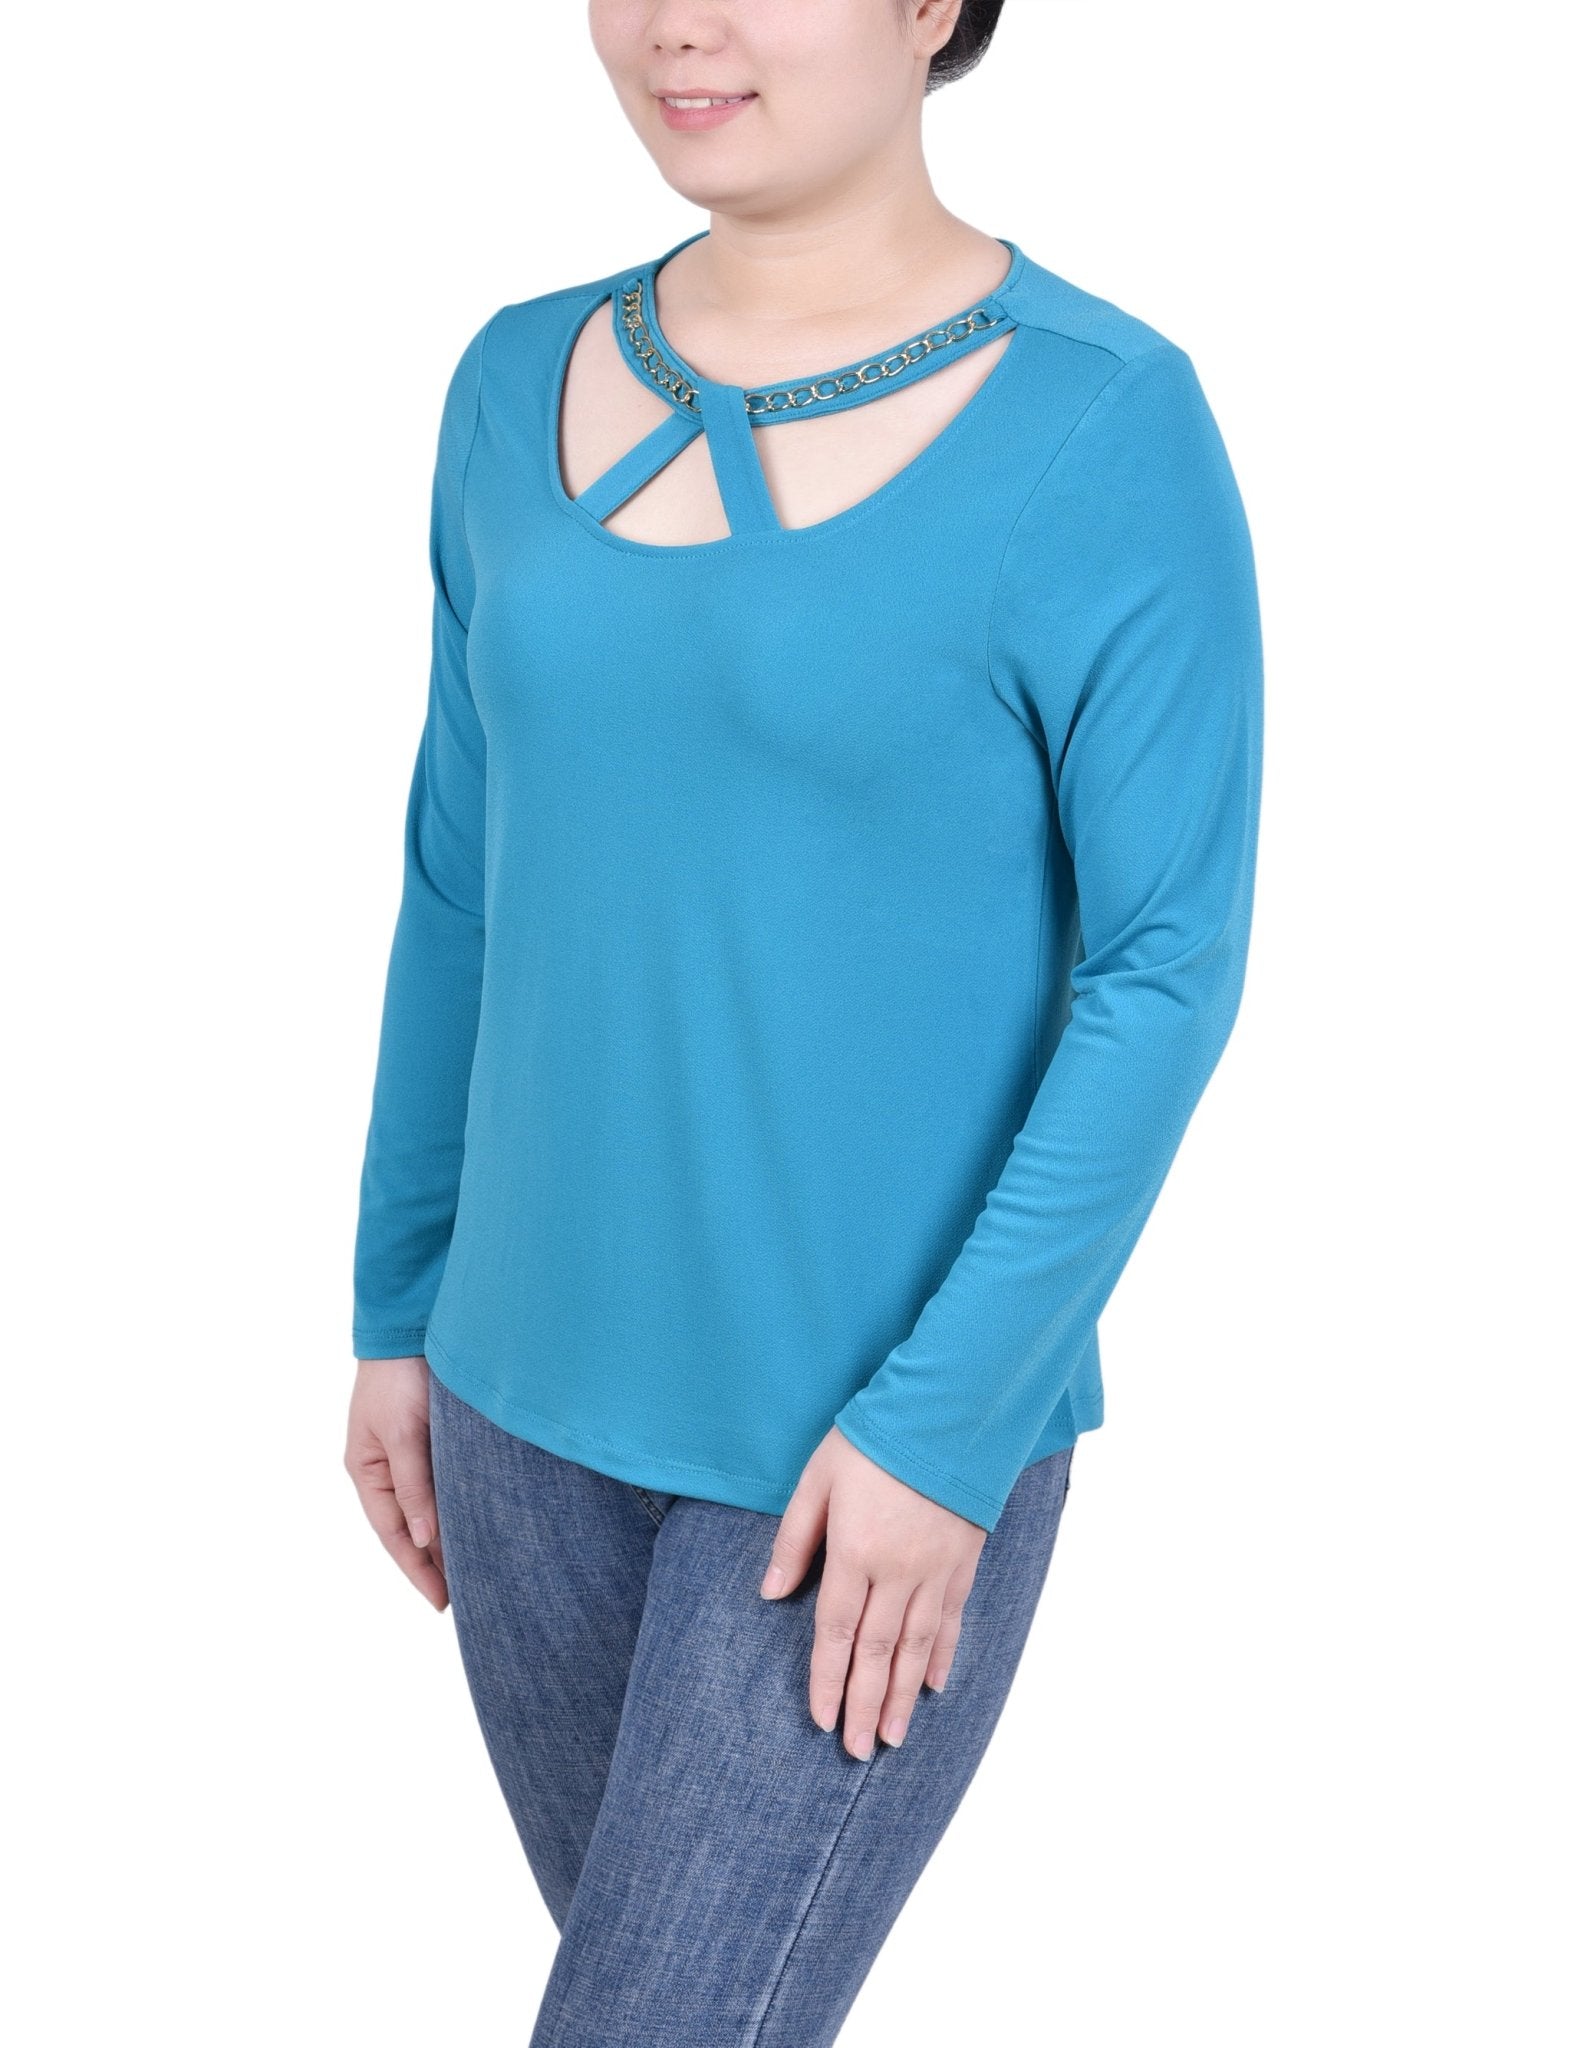 NY Collection Long Sleeve Jeweled Neck Top - Petite - DressbarnShirts & Blouses